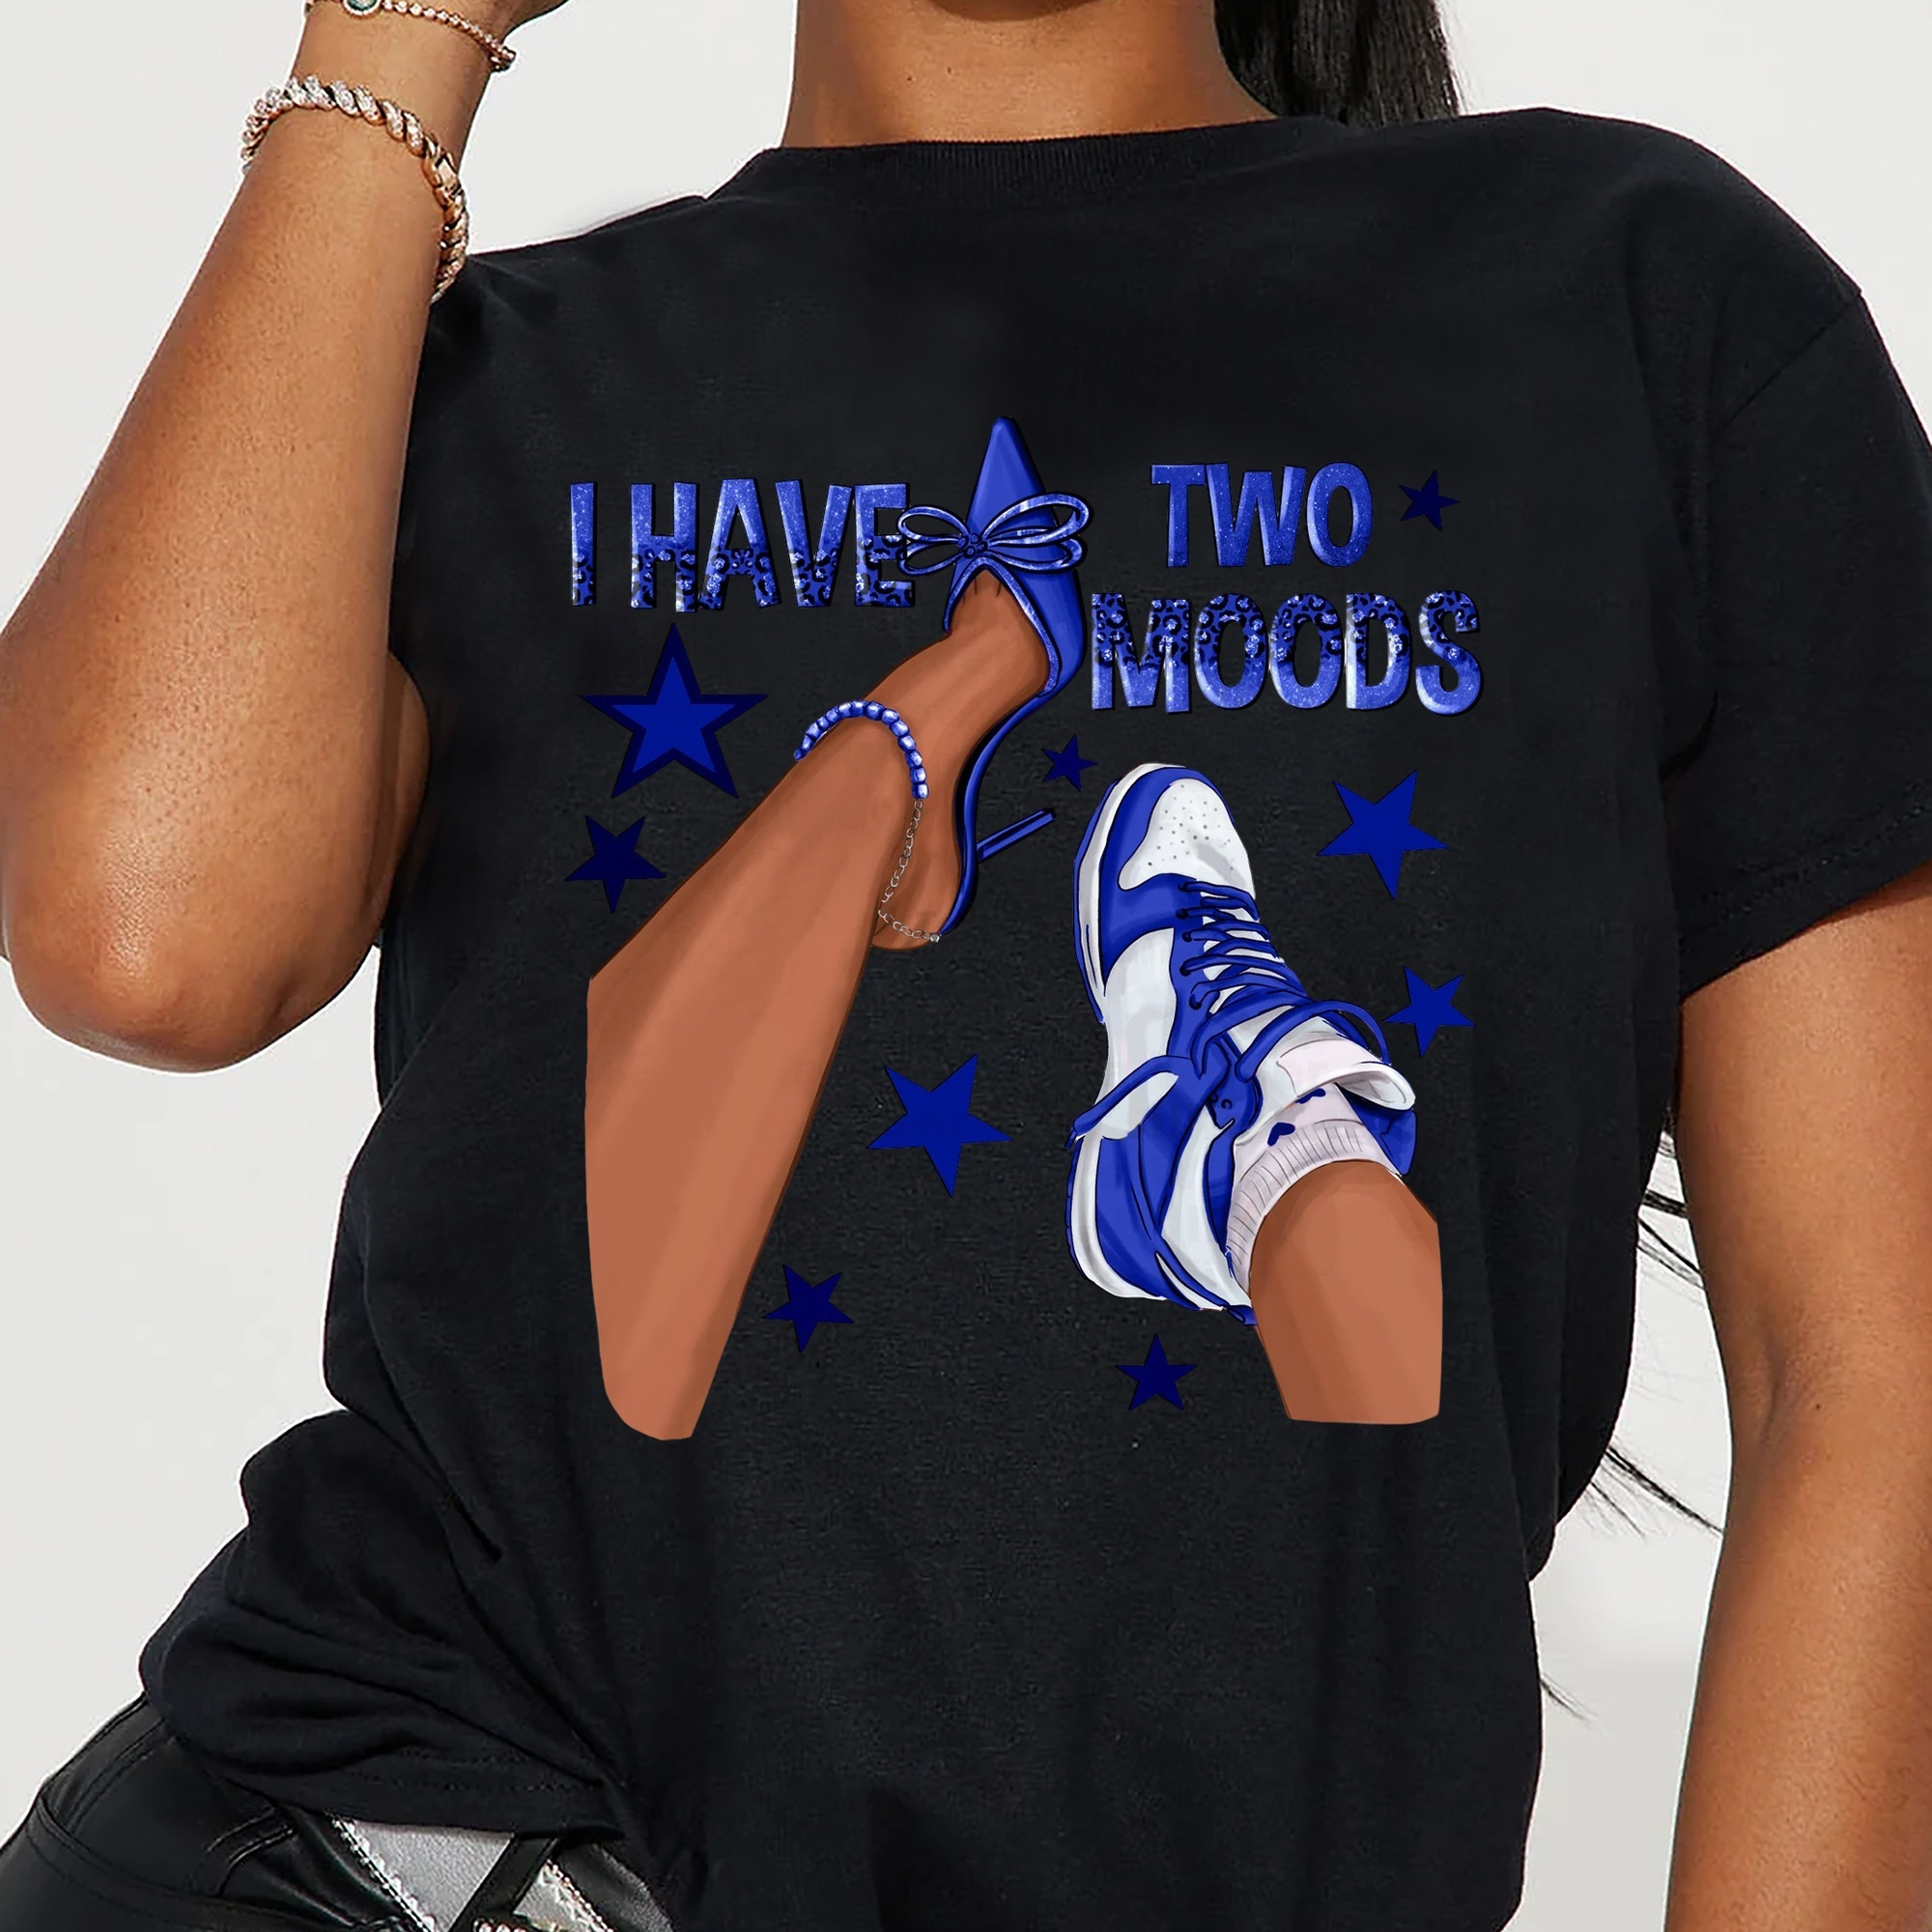 

I Have 2 Moods Print T-shirt, Short Sleeve Crew Neck Casual Top For Summer & Spring, Women's Clothing